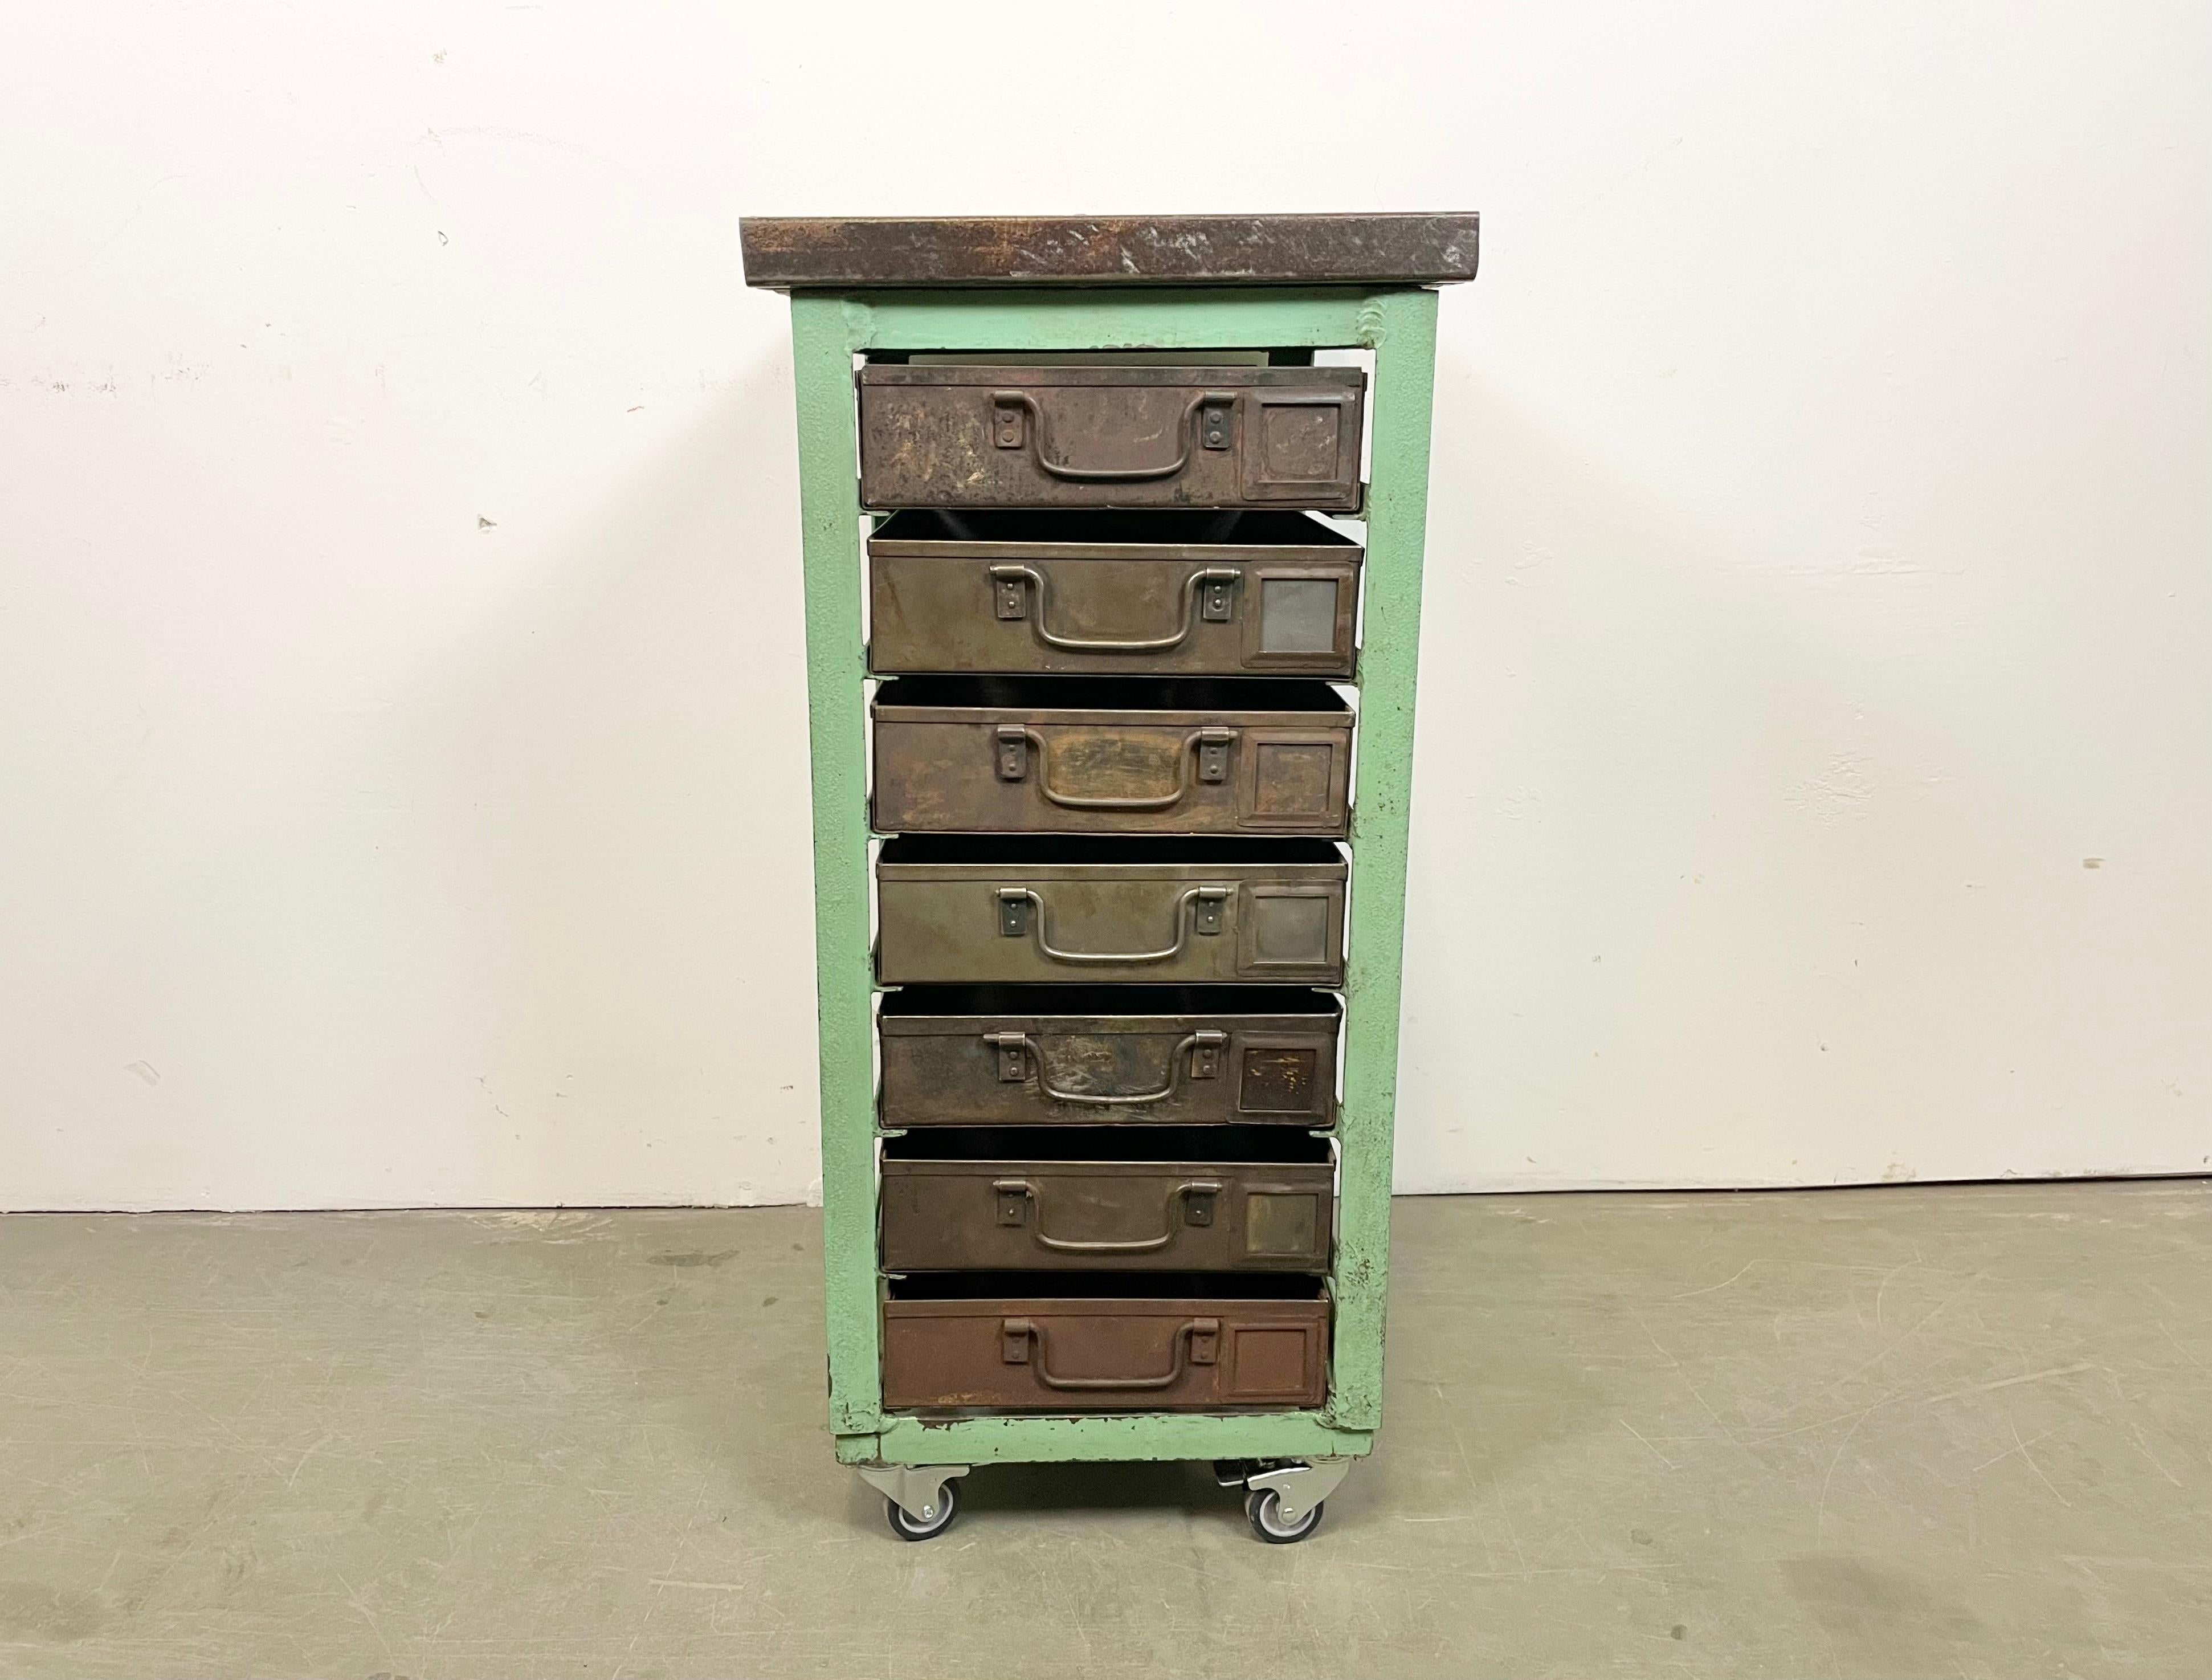 This vintage Industrial iron chest of drawers was made in former Czechoslovakla during the 1950s. It features an iron construction, wooden top and 7 metal drawers. Additional dimensions: 
Drawer dimensions :- Width 28 cm, depth 44 cm, height 8 cm